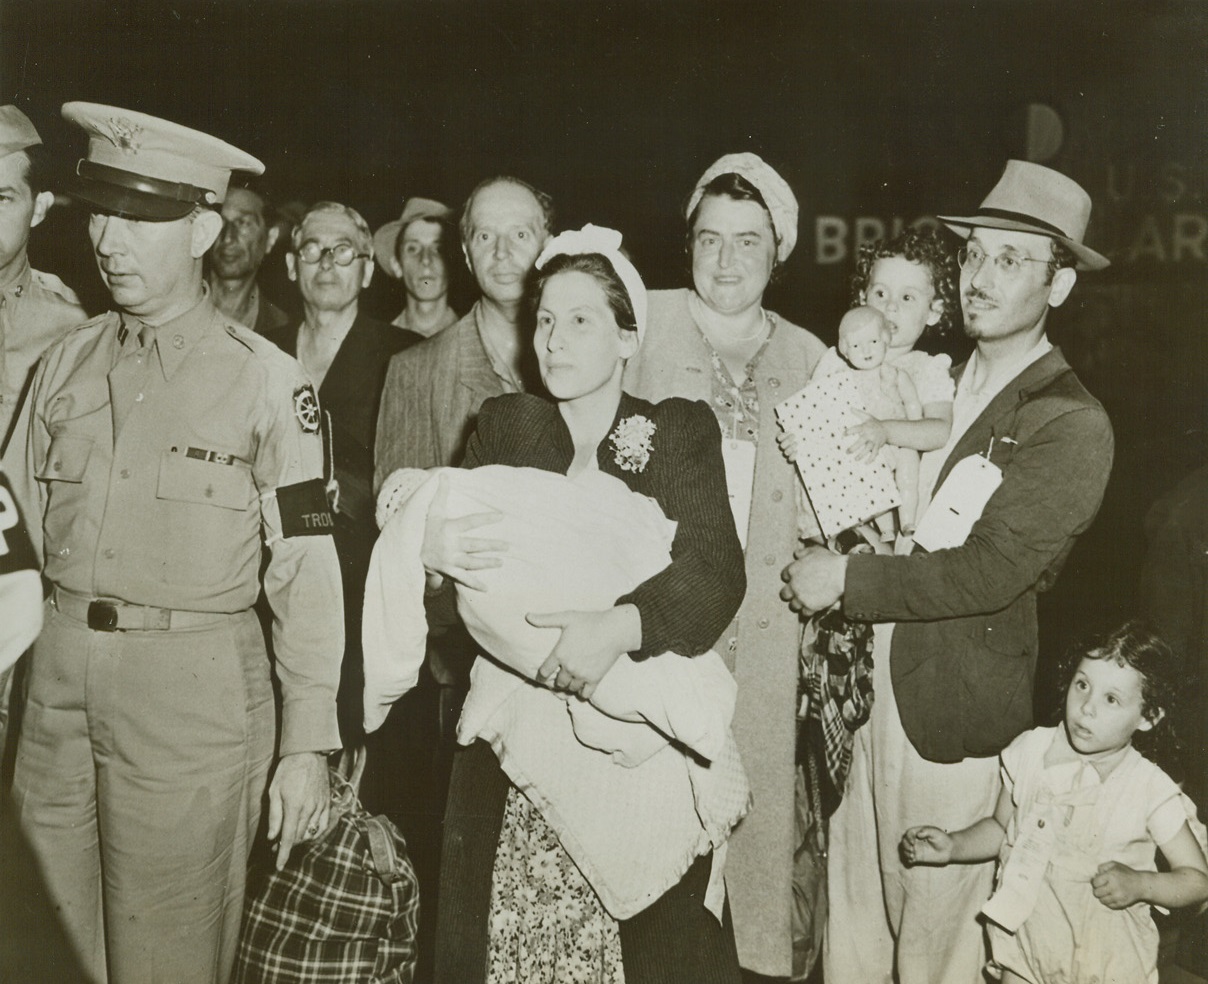 Free and Happy, 8/4/1944. Hoboken, New Jersey -- Headed for the train that is to carry them to Fort Ontario near Oswego, New York, is this family, part of almost 1,000 refugees from Italy who will remain in this country for the duration of the war. They are (left to right): Mrs. Netta Rothchild, holding her four-weeks old daughter Gratzia; and Mr. Isreal Rothchild, carrying his daughter Reneta as another daughter, Fanny, walks beside him. Credit: ACME;